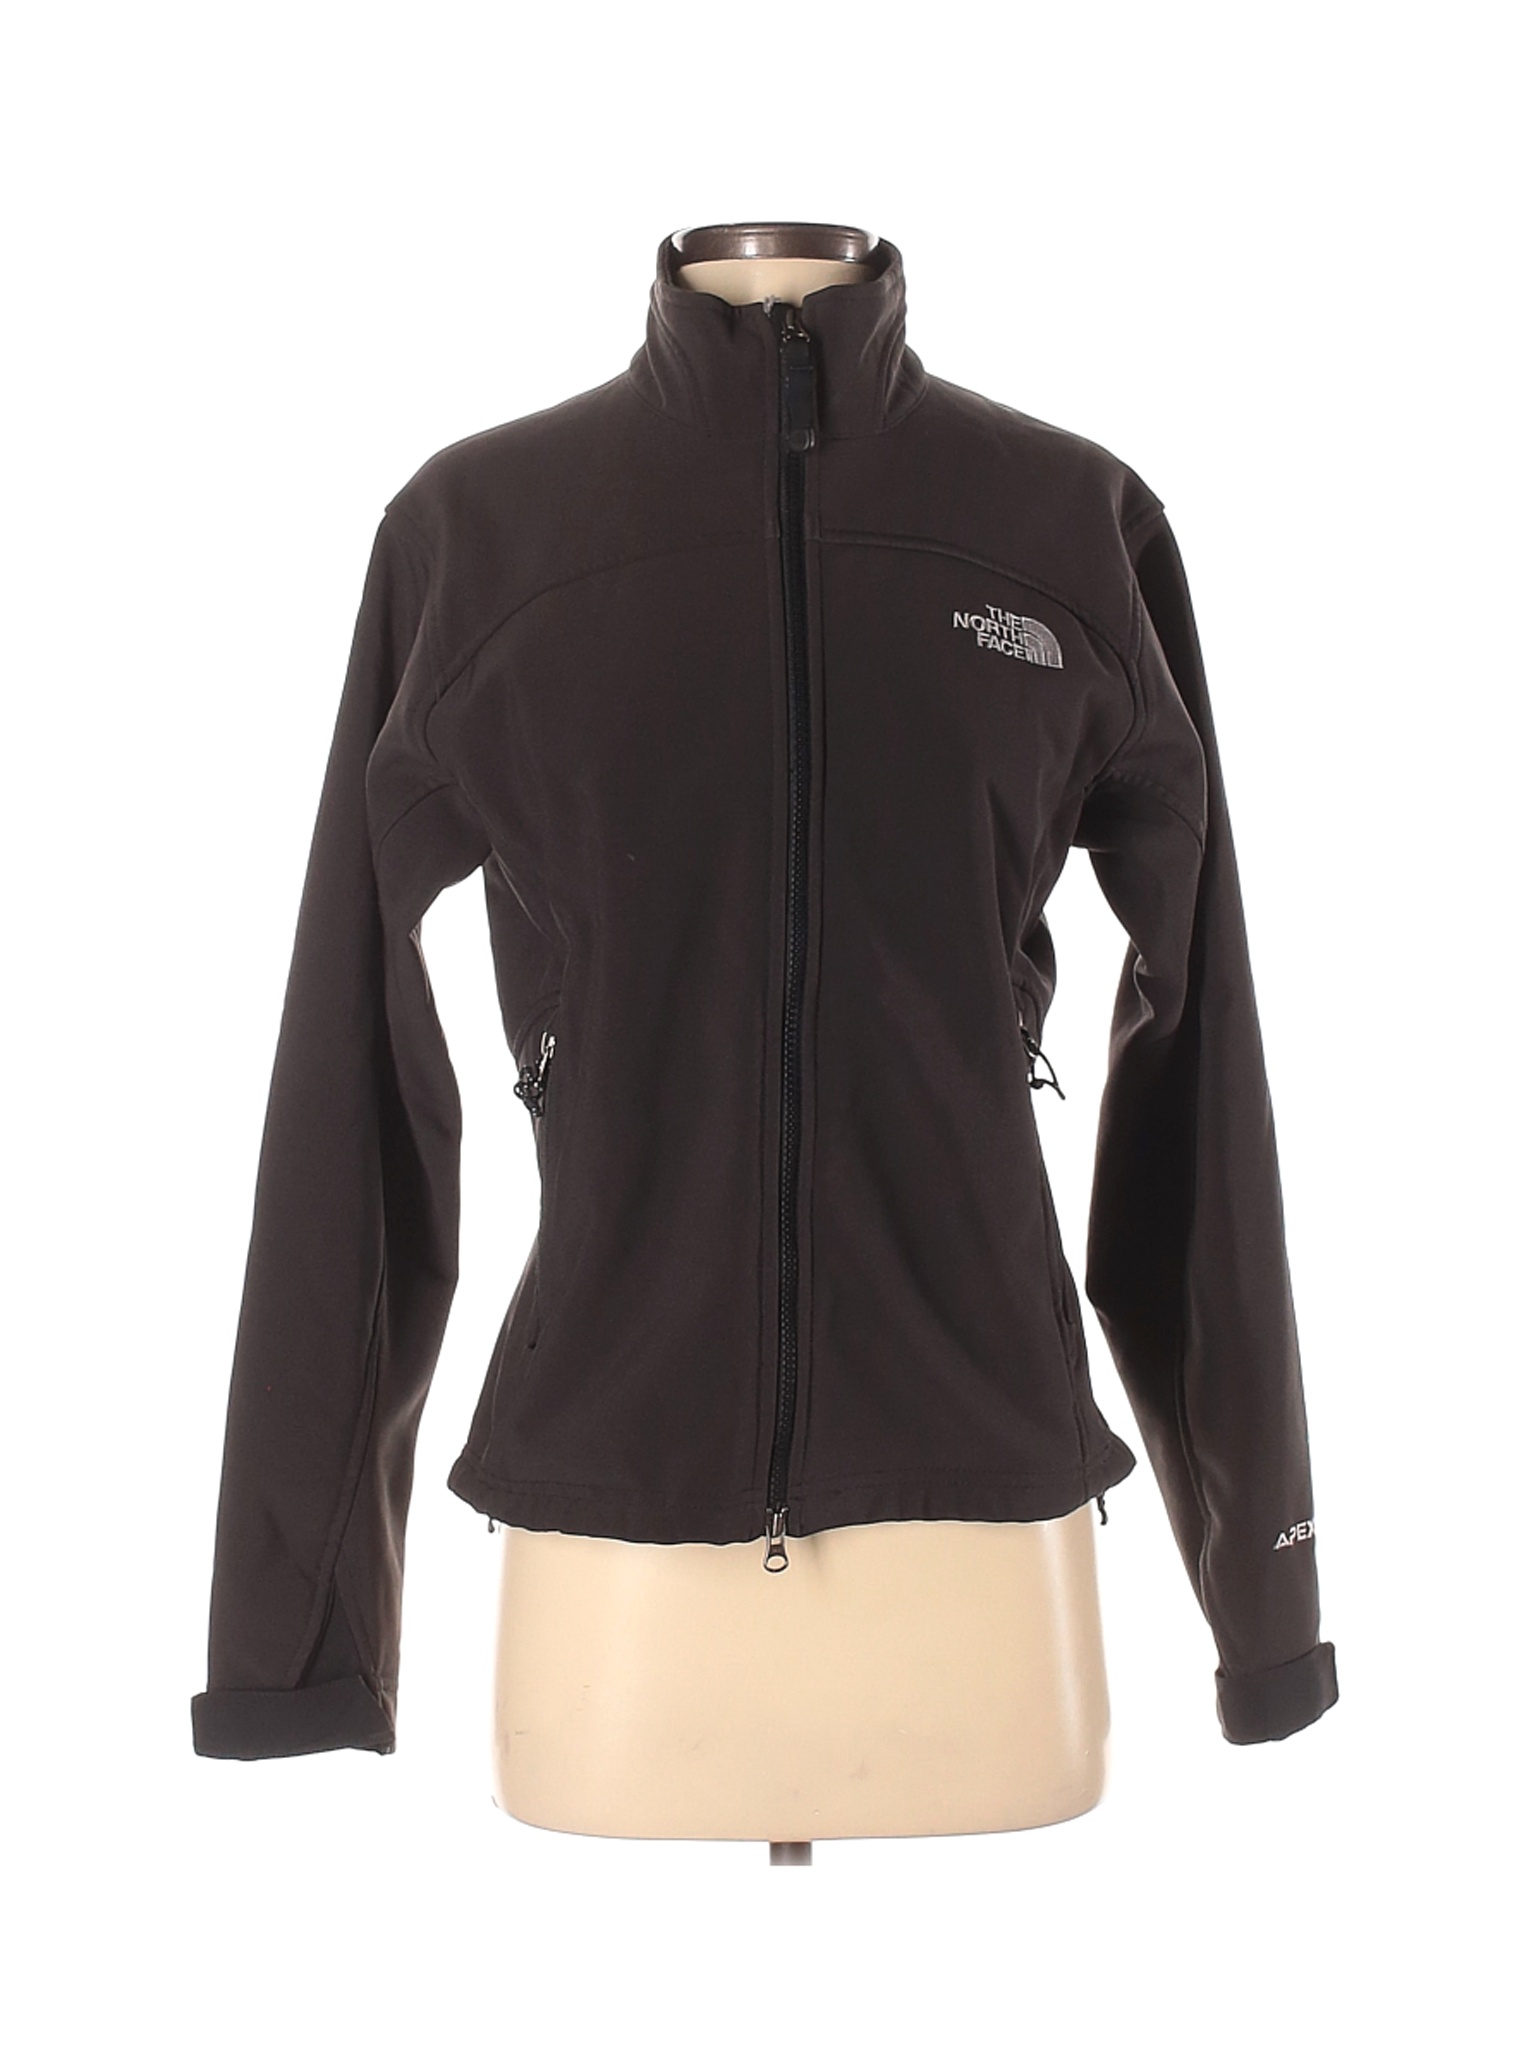 The North Face Women Brown Jacket S | eBay